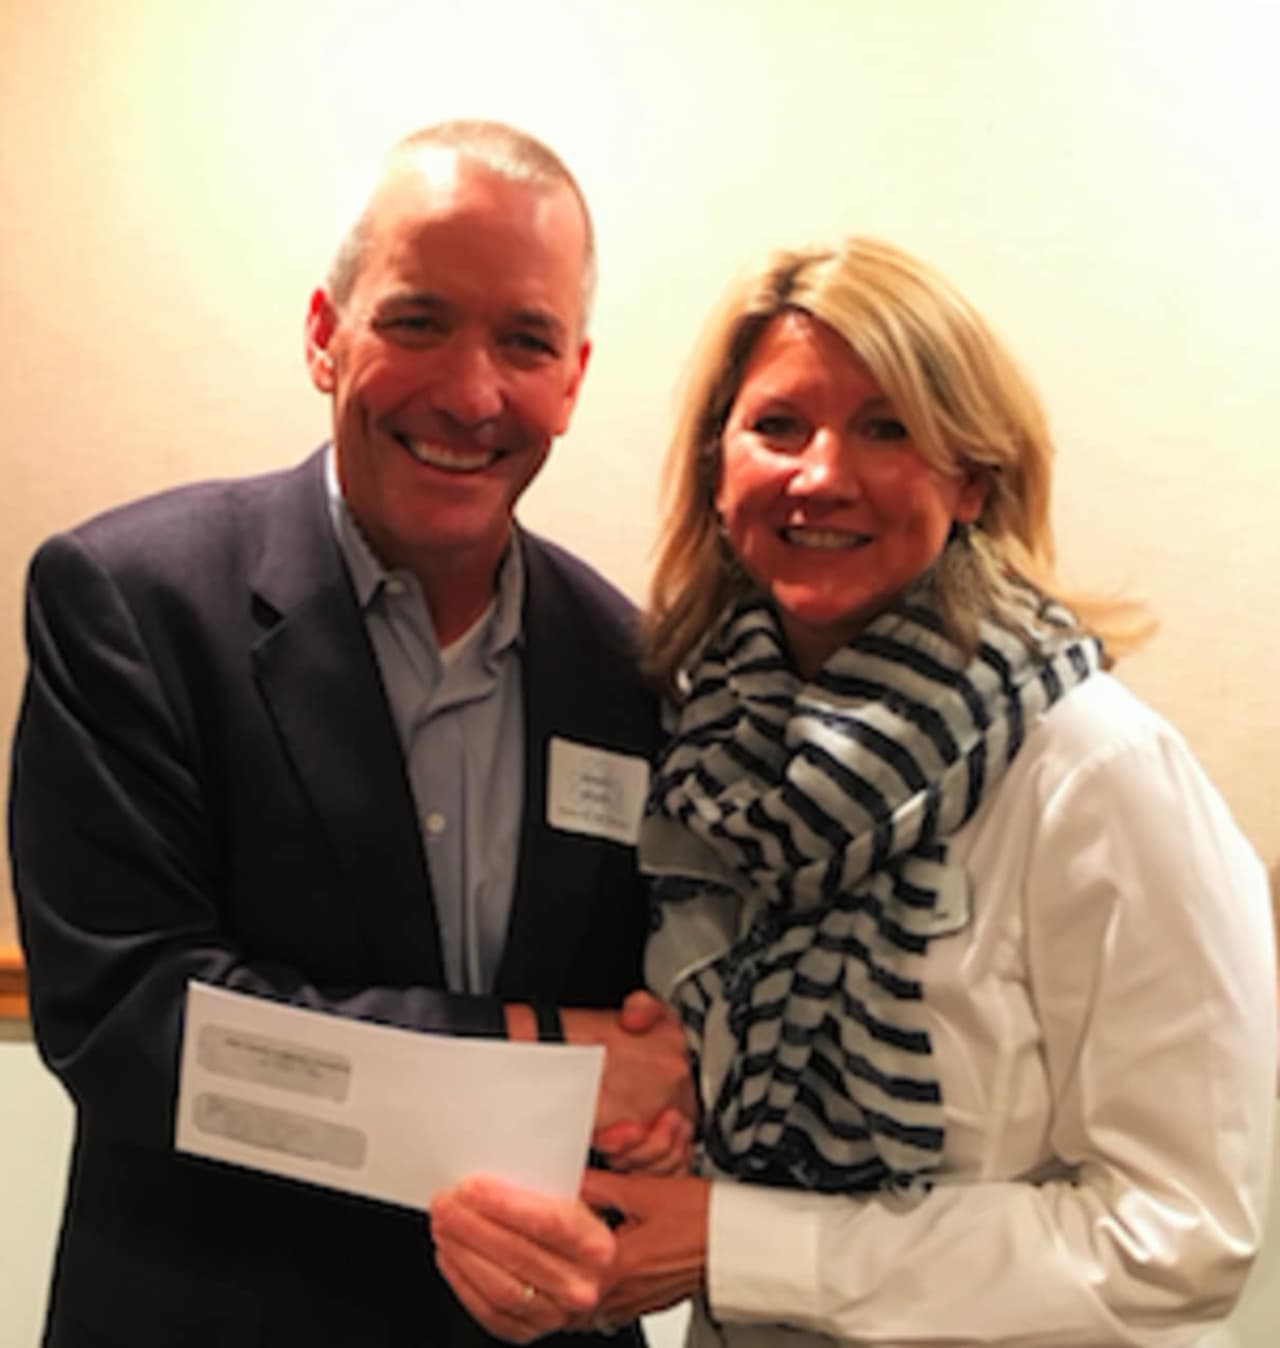 Jim Bosek, Shelter for the Homeless board chair, with New Canaan Community Foundation board member Kay Linneman after receiving a $12,500 grant to support the shelter’s emergency meals program.